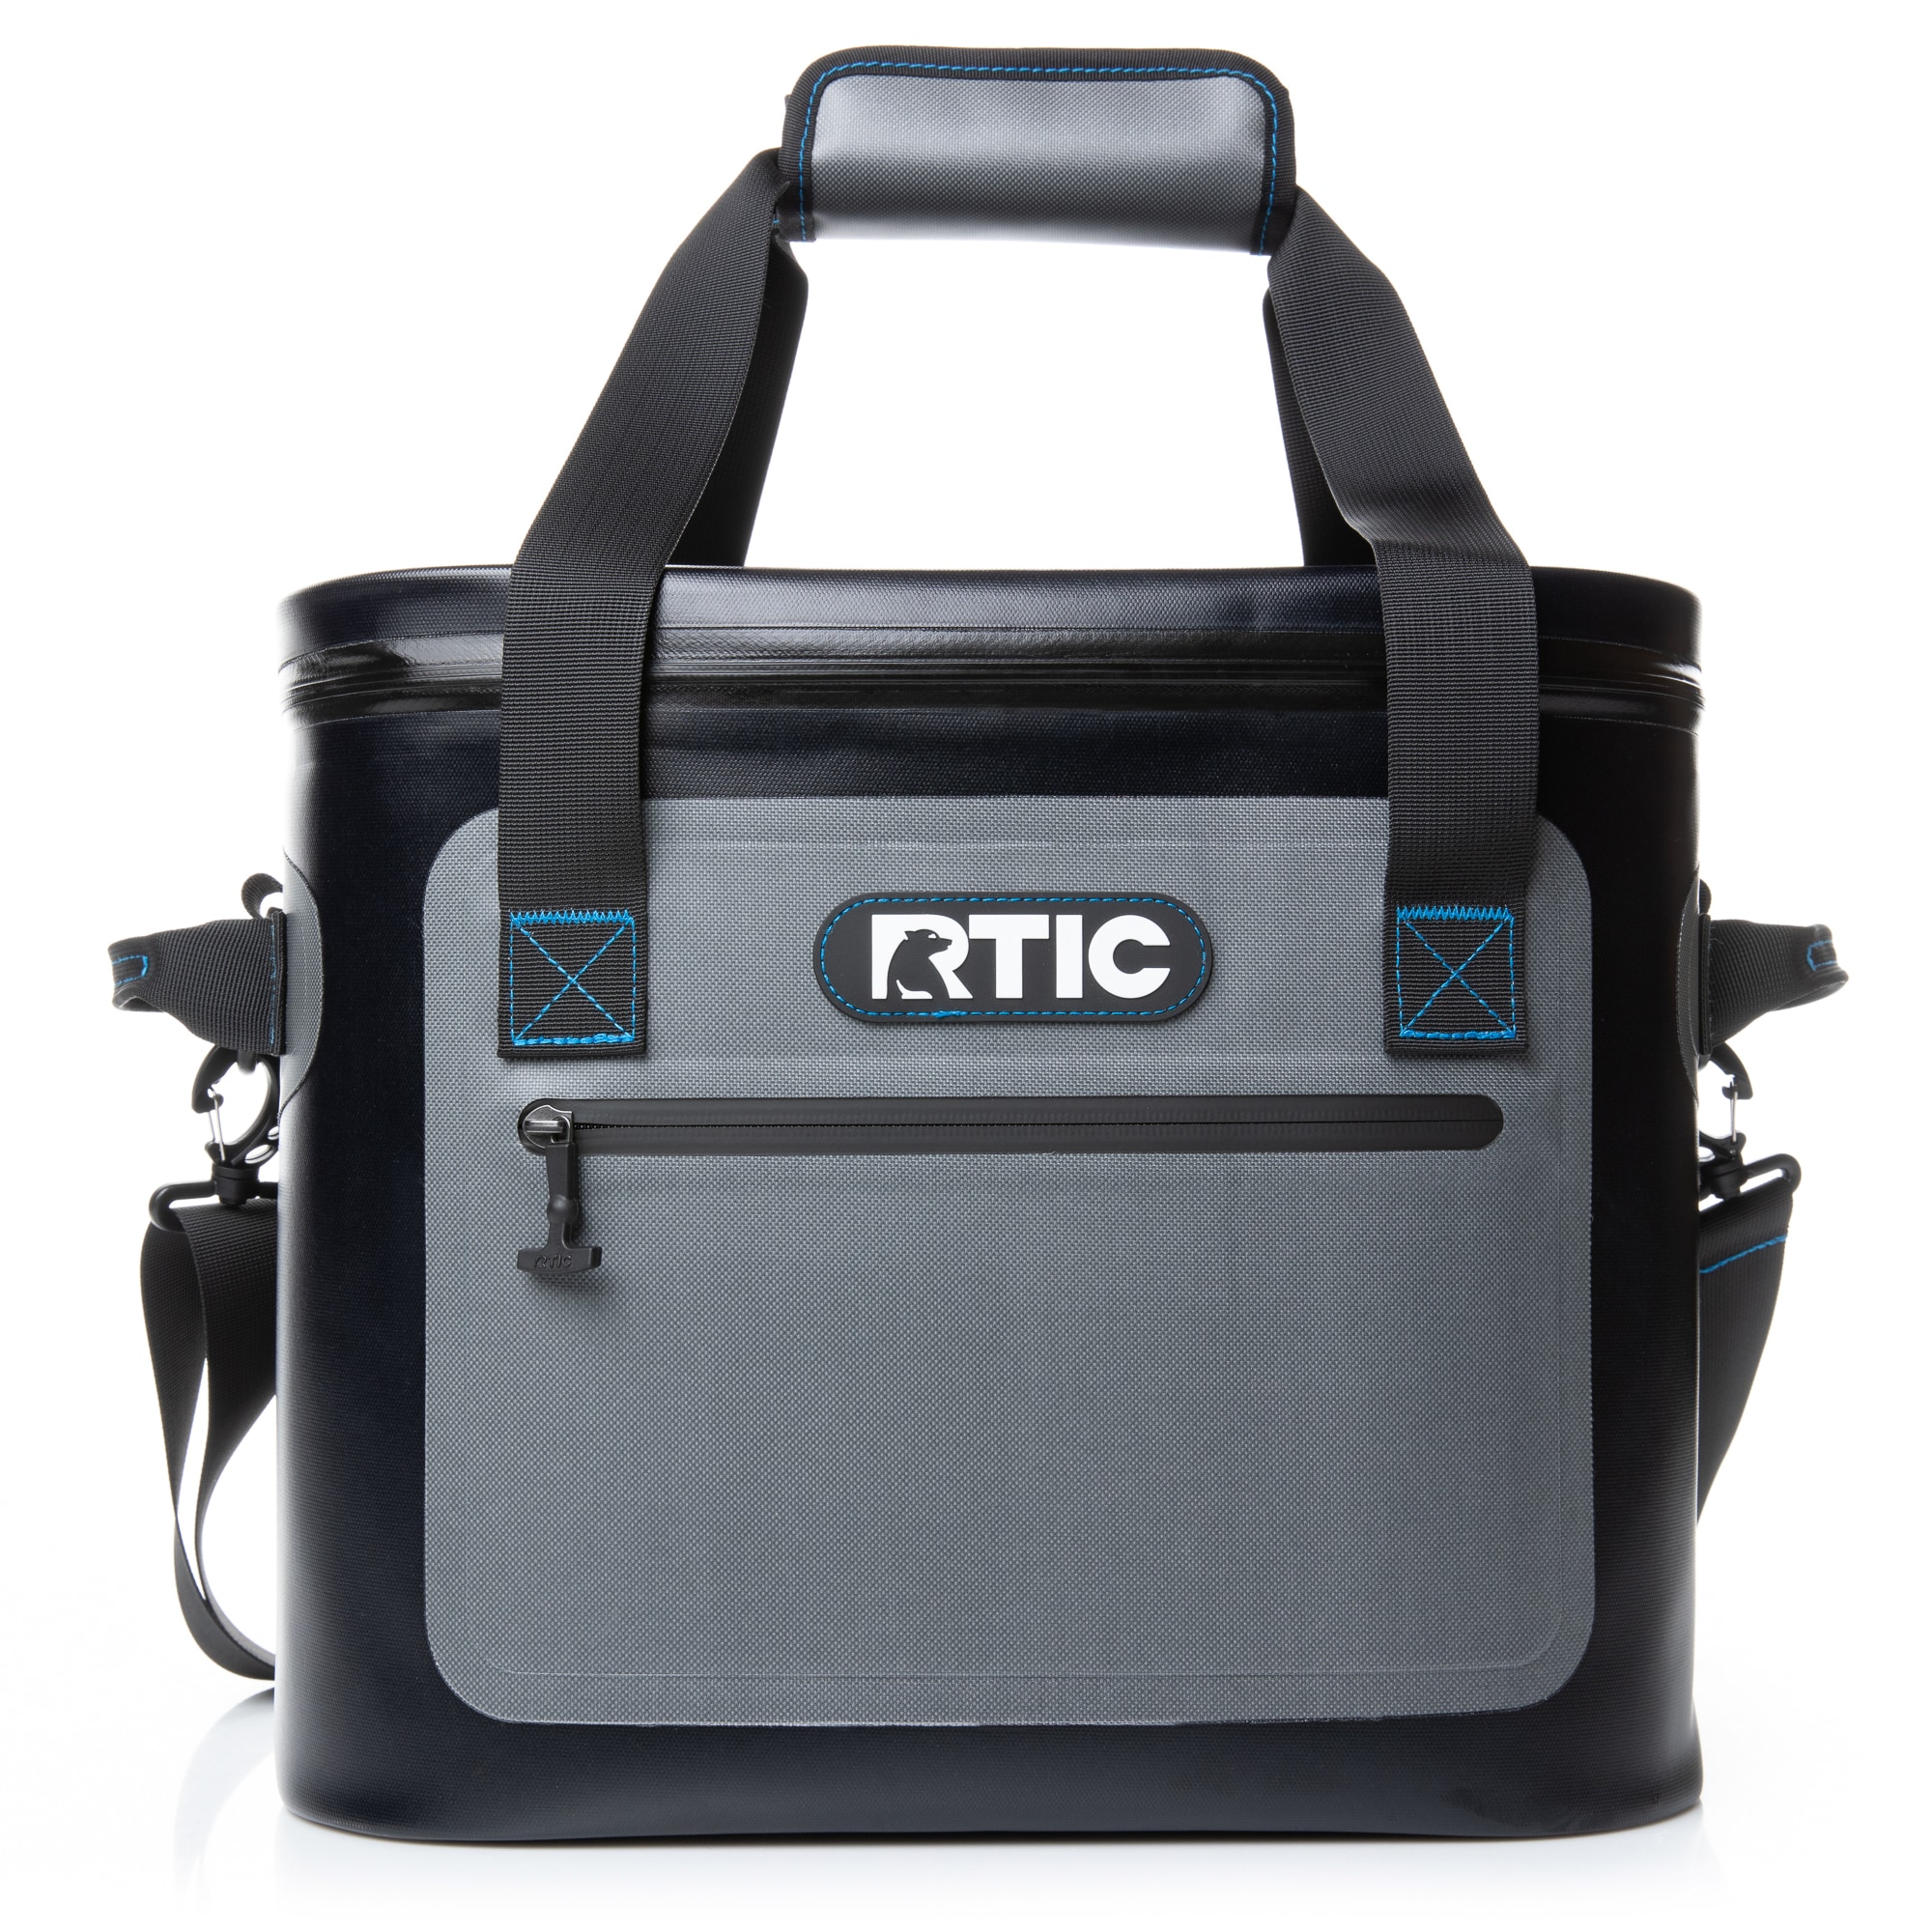 RTIC Soft Pack Insulated Cooler Bag - 30 Cans - Blue/Gray